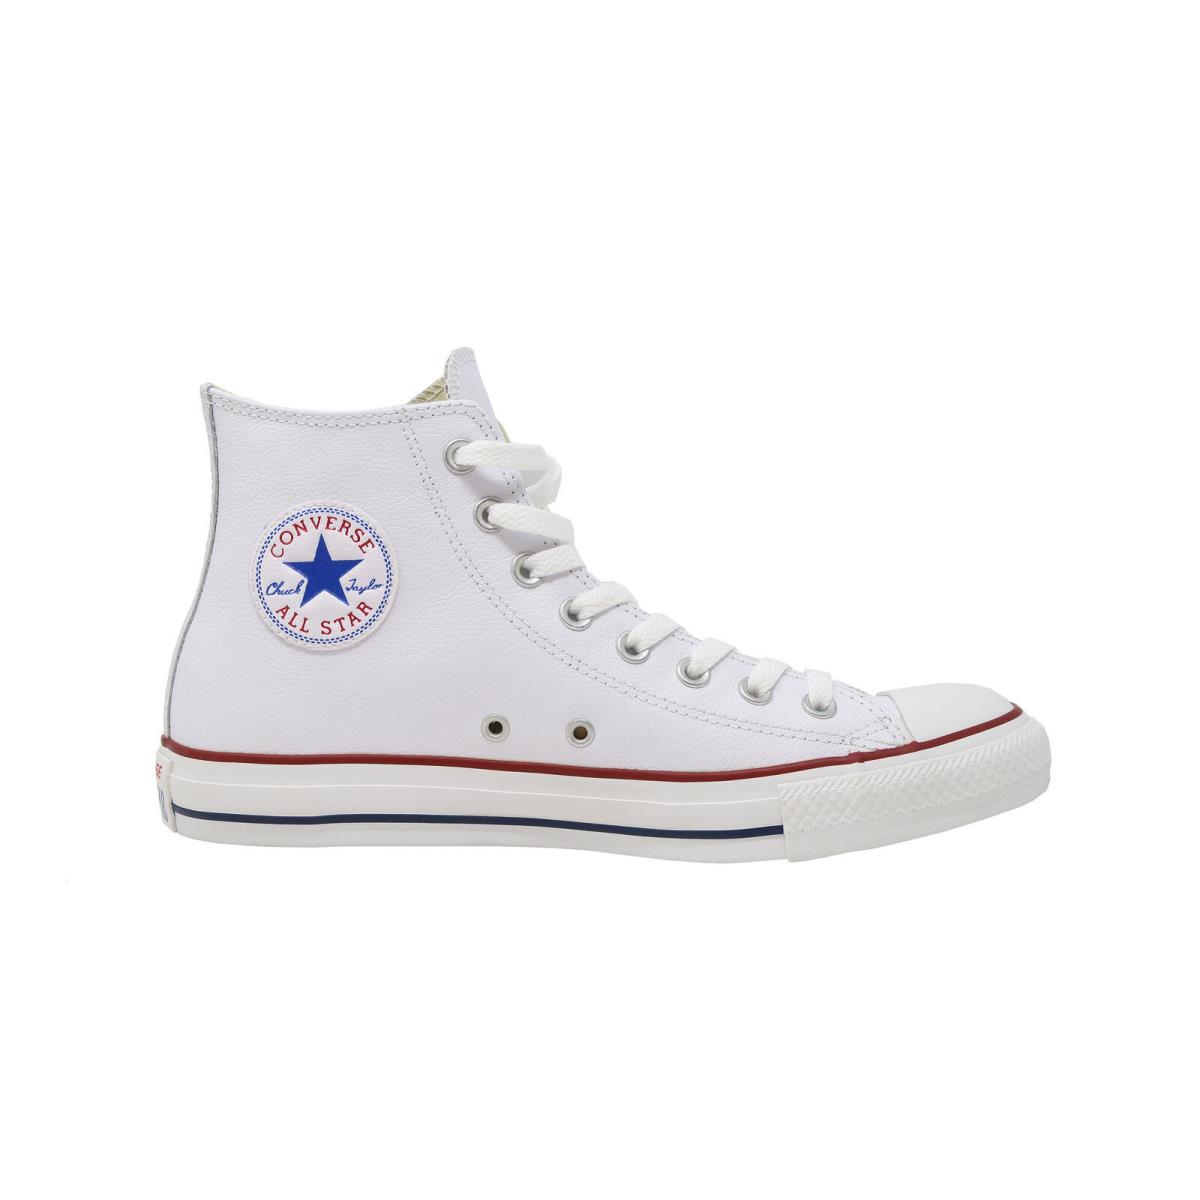 Converse All Star Chuck Taylor Hi Top White Leather Red Sneakers Men Women Shoes